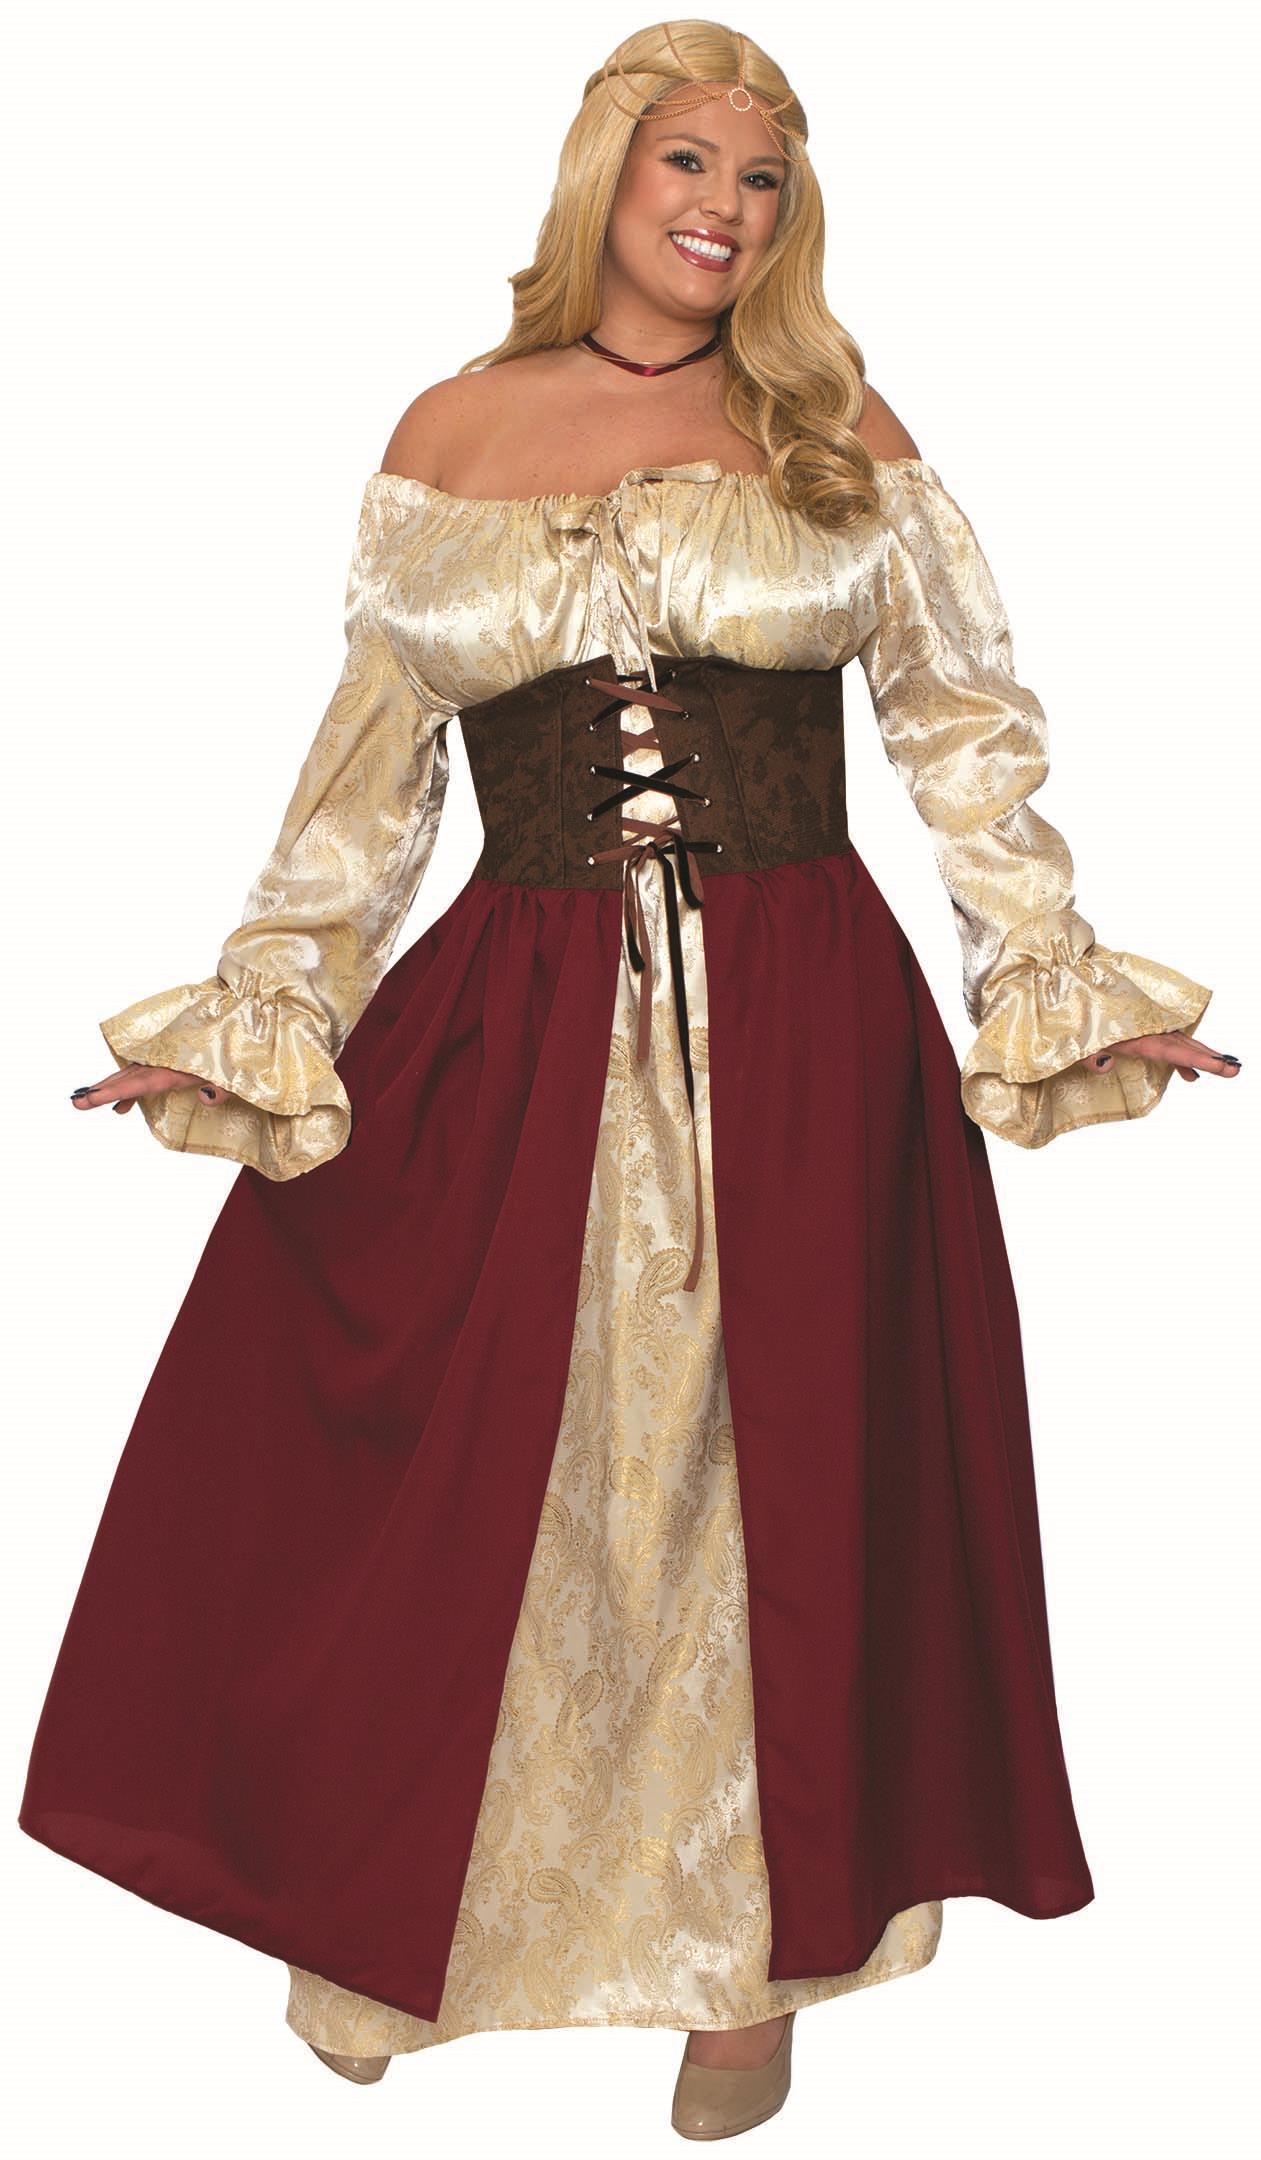 Medieval Pirate Wench Adult Plus Size Costume Ebay 9138